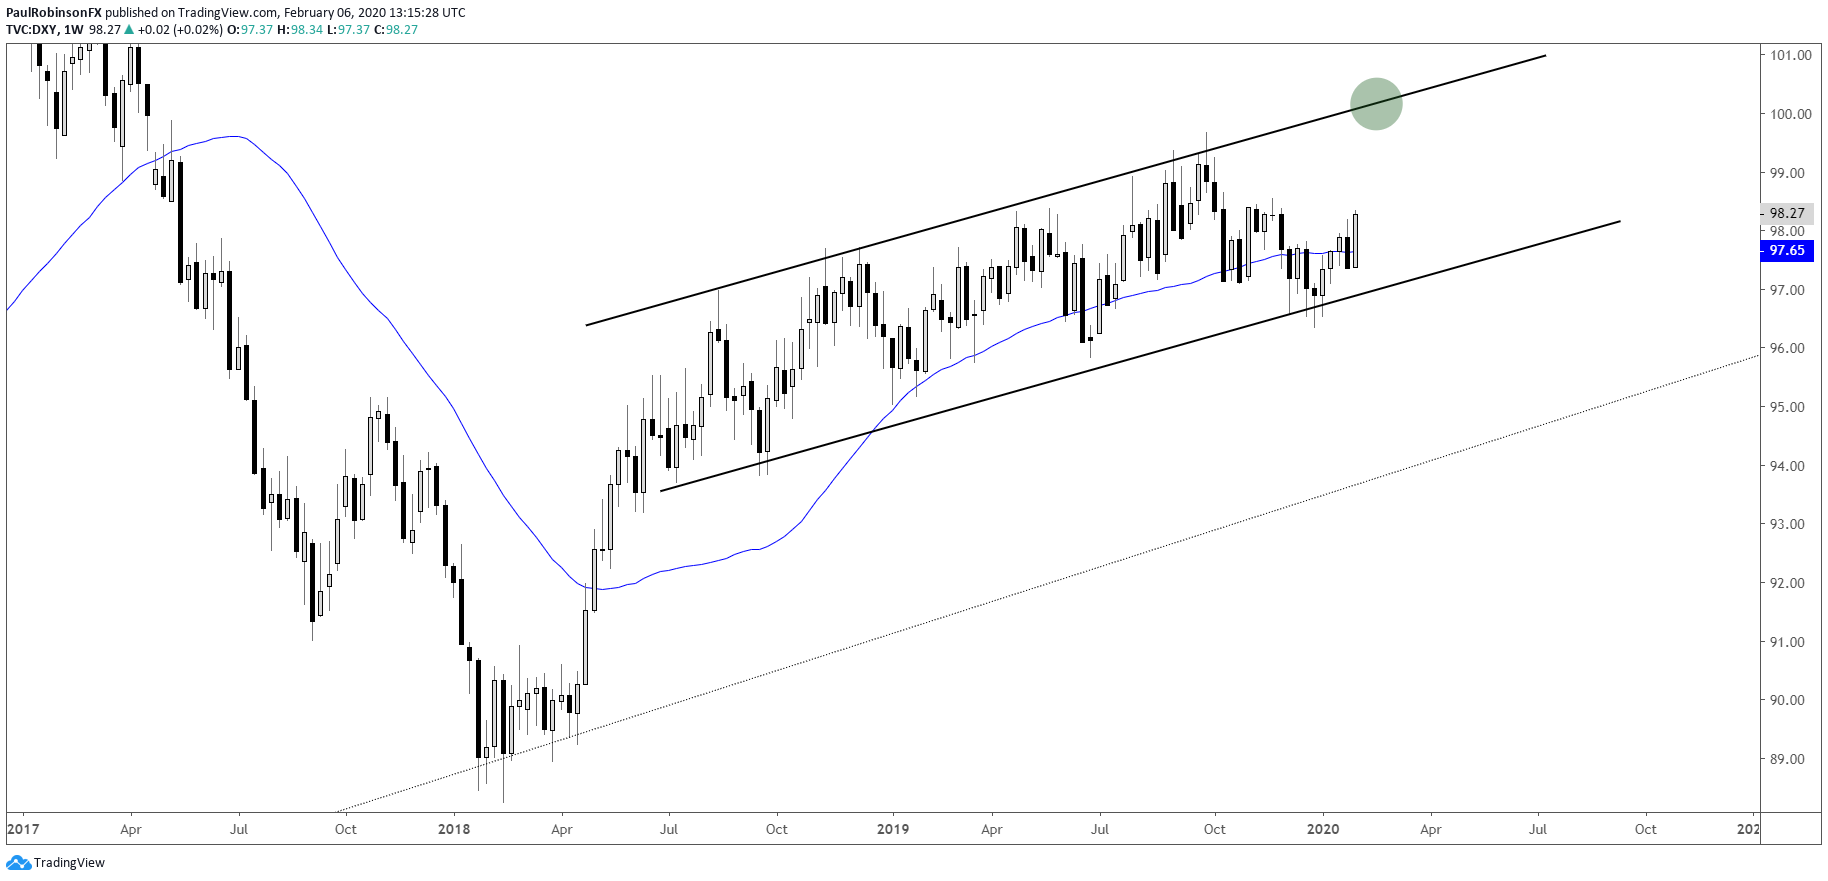 US Dollar Index (DXY) Weekly Chart